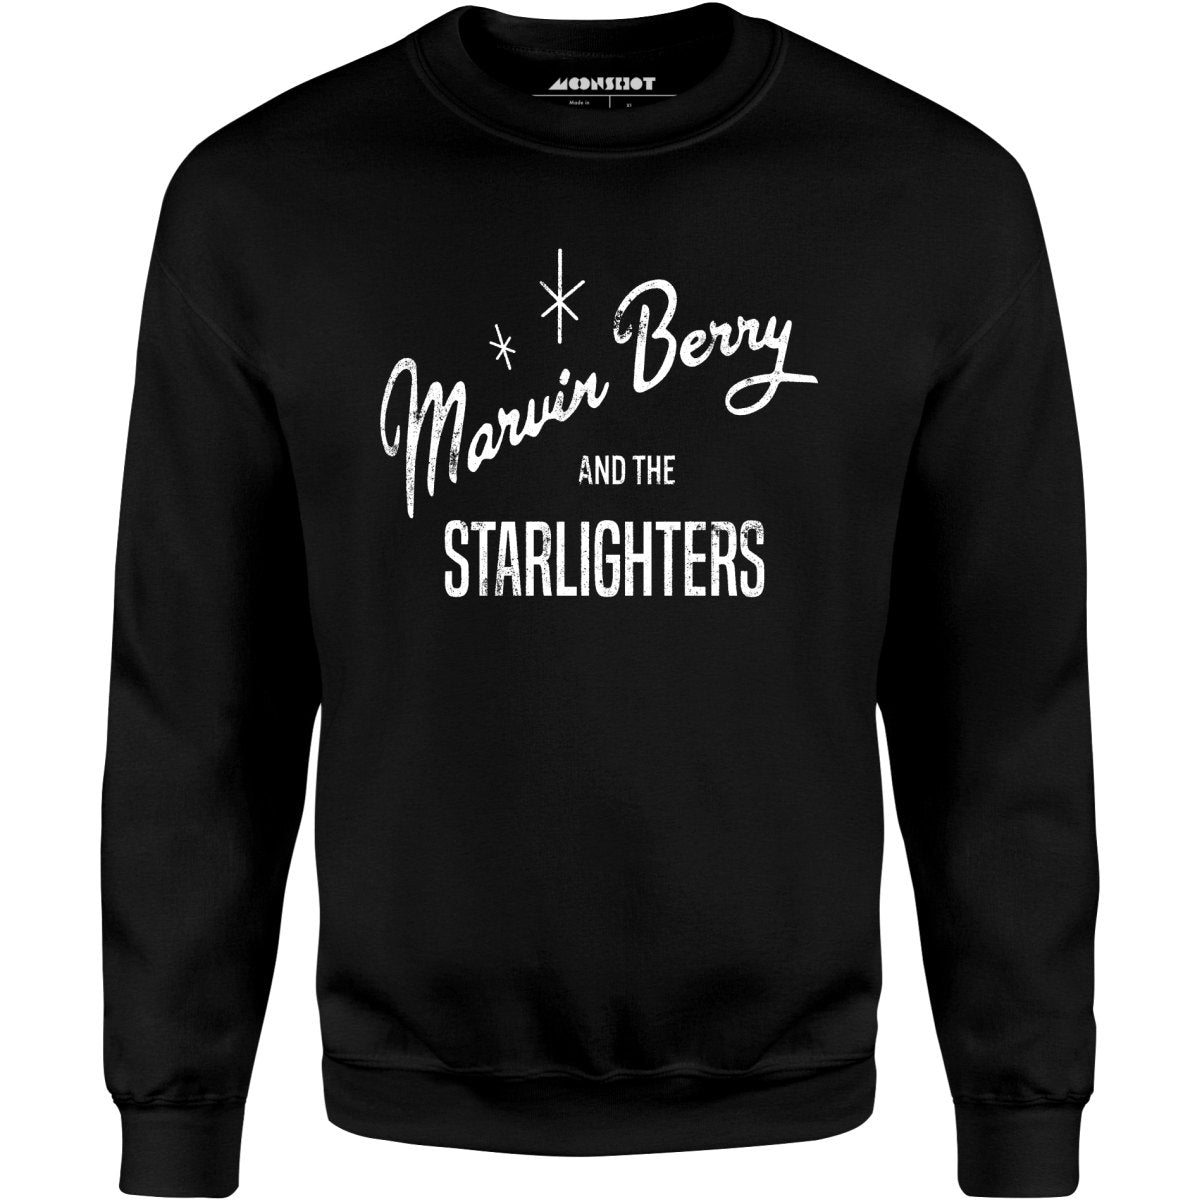 Marvin Berry and The Starlighters - Unisex Sweatshirt